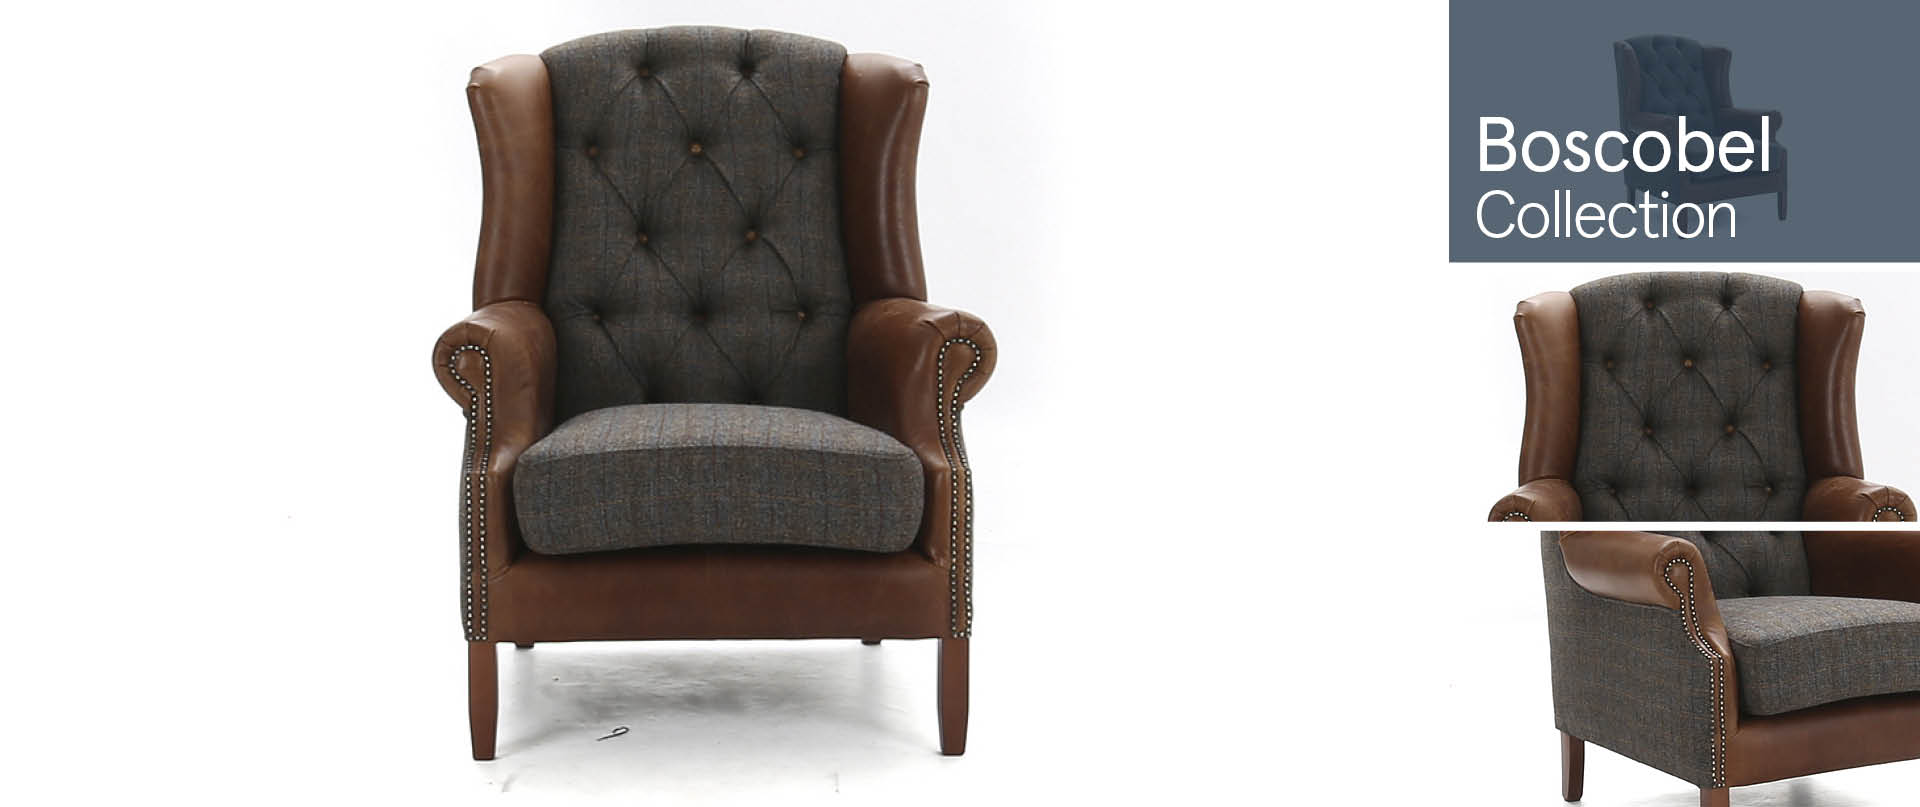 Boscobel Chairs and Footstools Ranges